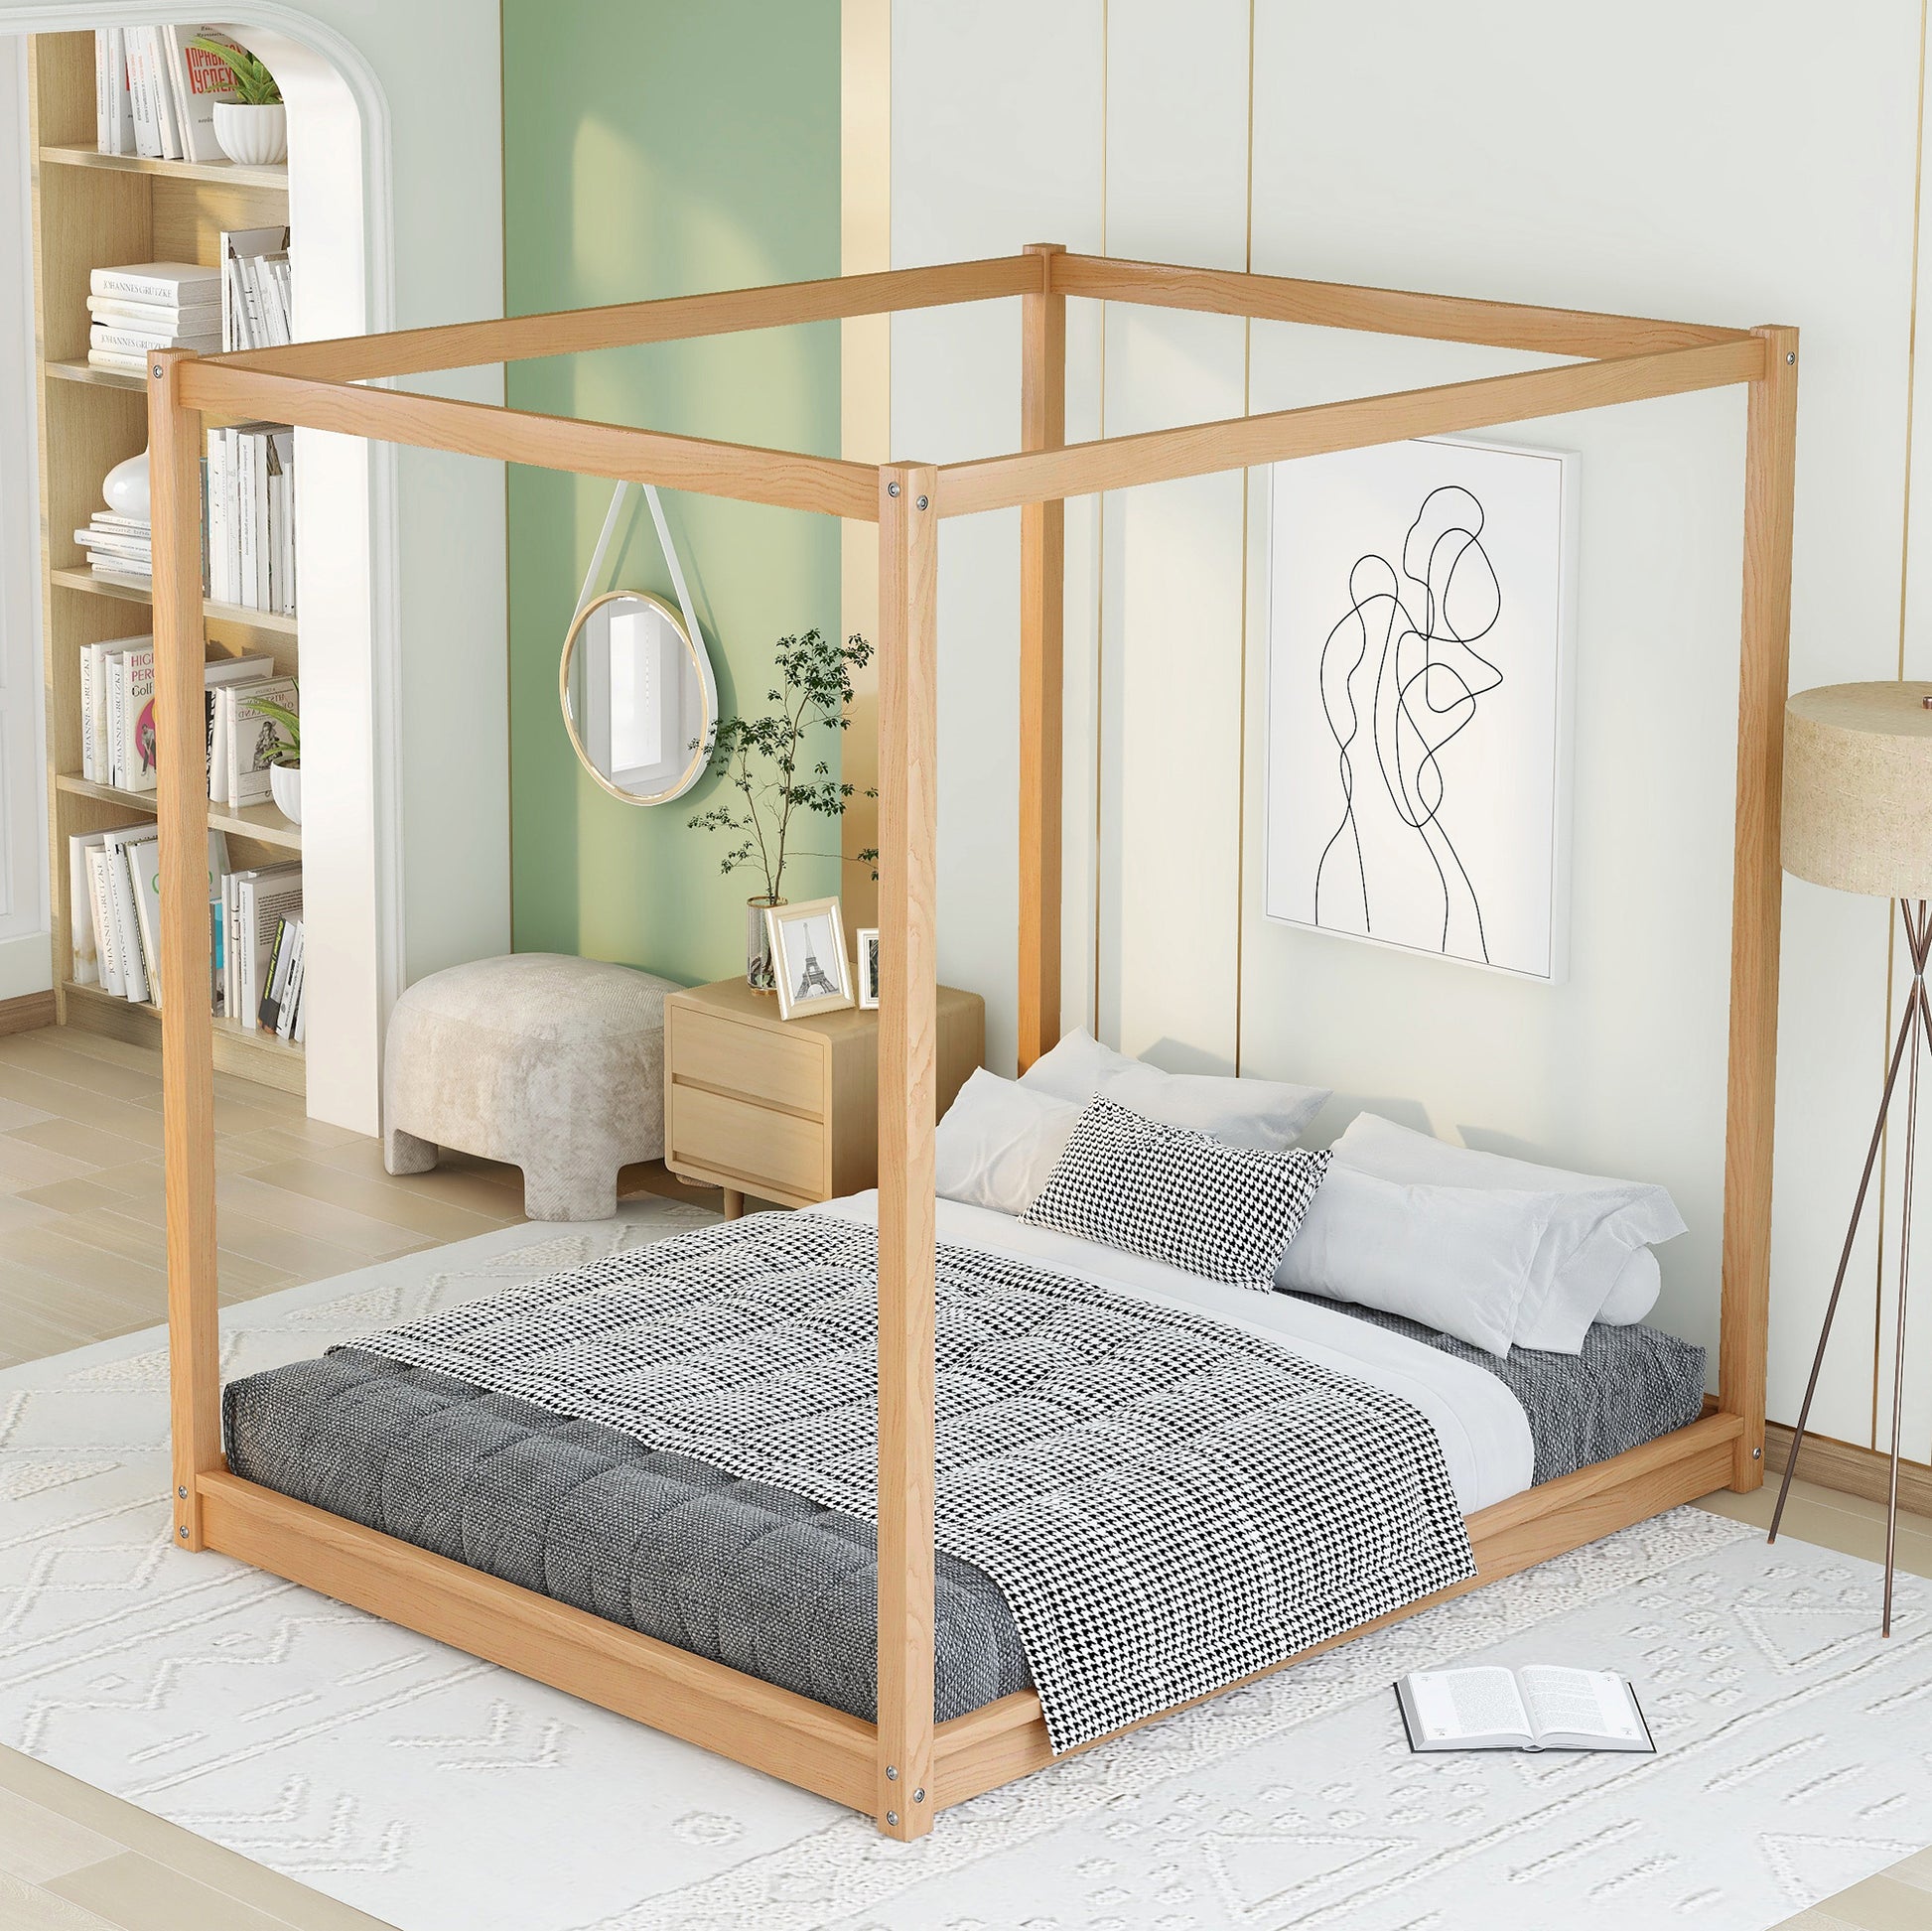 Queen Size Canopy Platform Bed with Support Legs,Natural